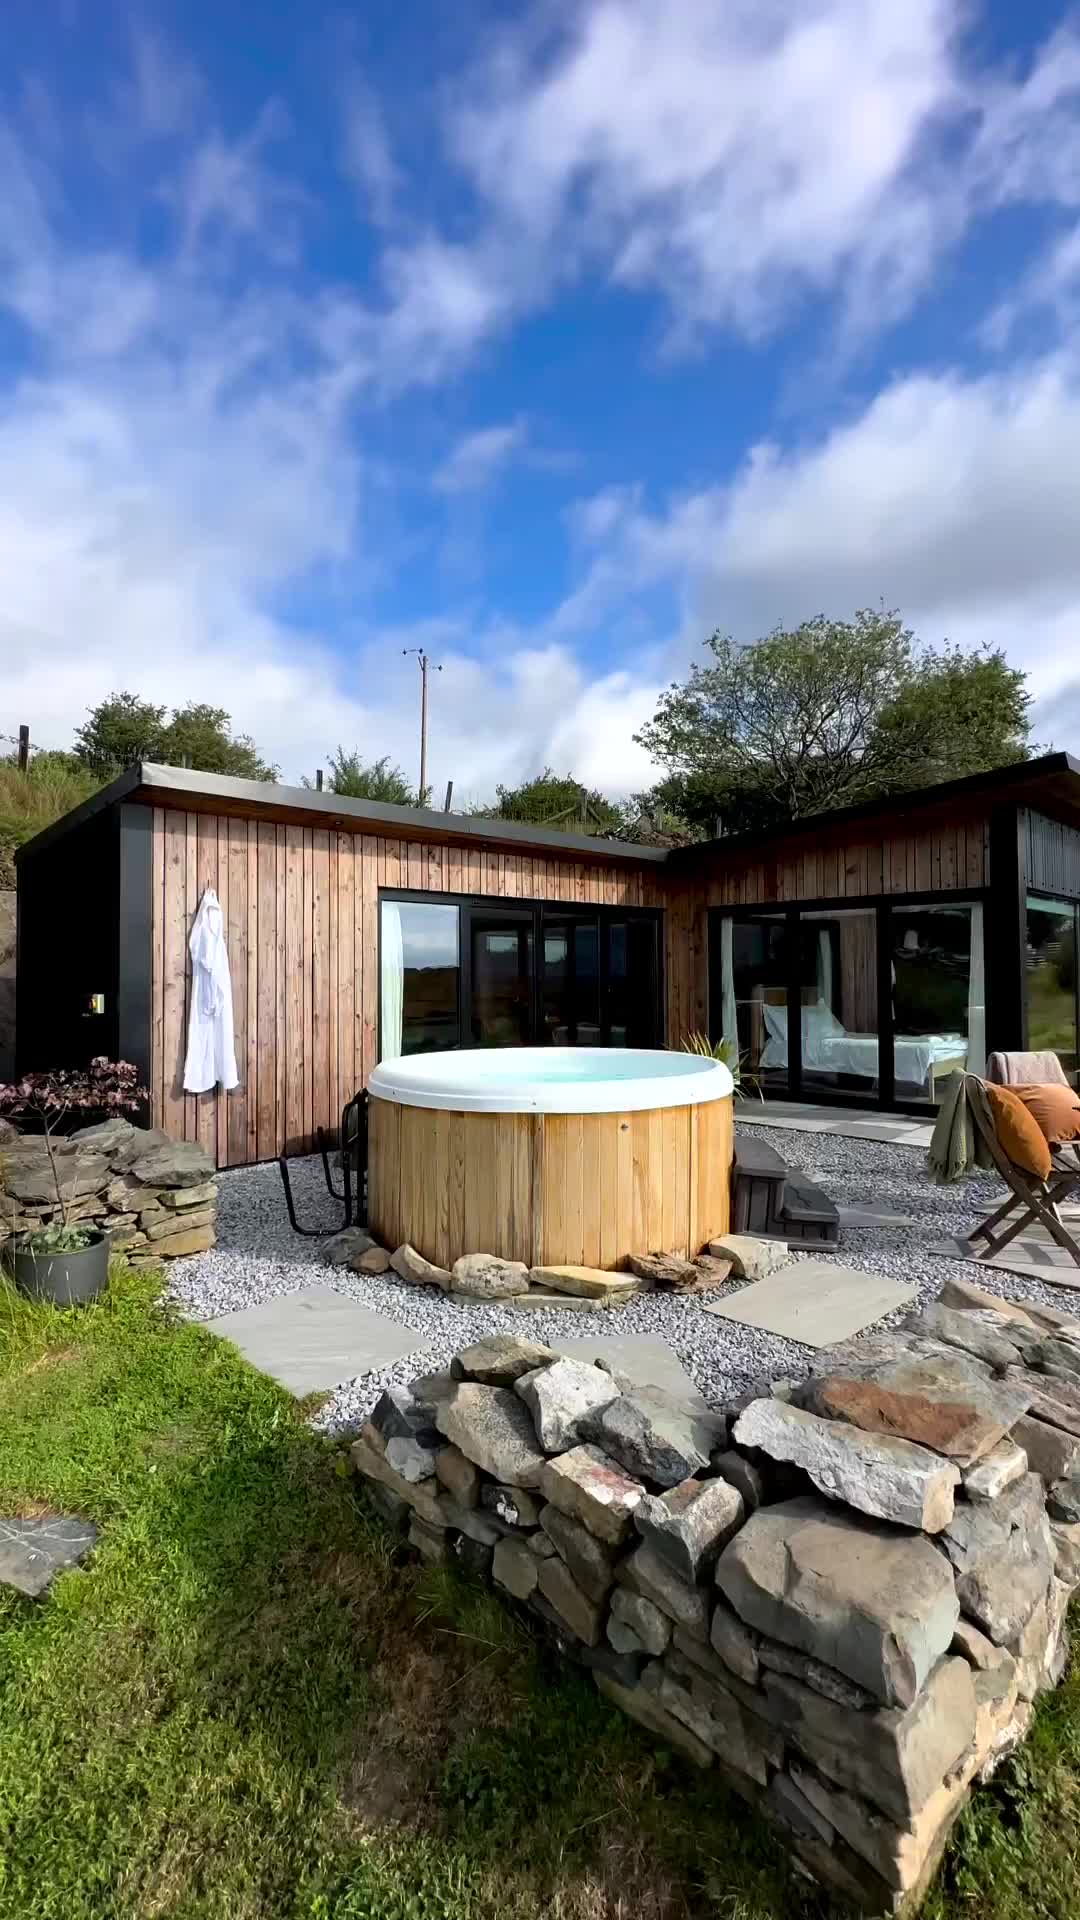 A Welsh Countryside Retreat ✨😍

Experience romance in the rustic-chic @dyffrynceri cabin. Stunning views, bi-fold doors, and a hot tub under the stars. 

Explore Wales’ coastline by day, stargaze by the firepit at night. Your dream escape for two 😍

📸 @billmeasom 

#ukretreats #getaway #travel #staycation #beautifuldestinations #uniquestays